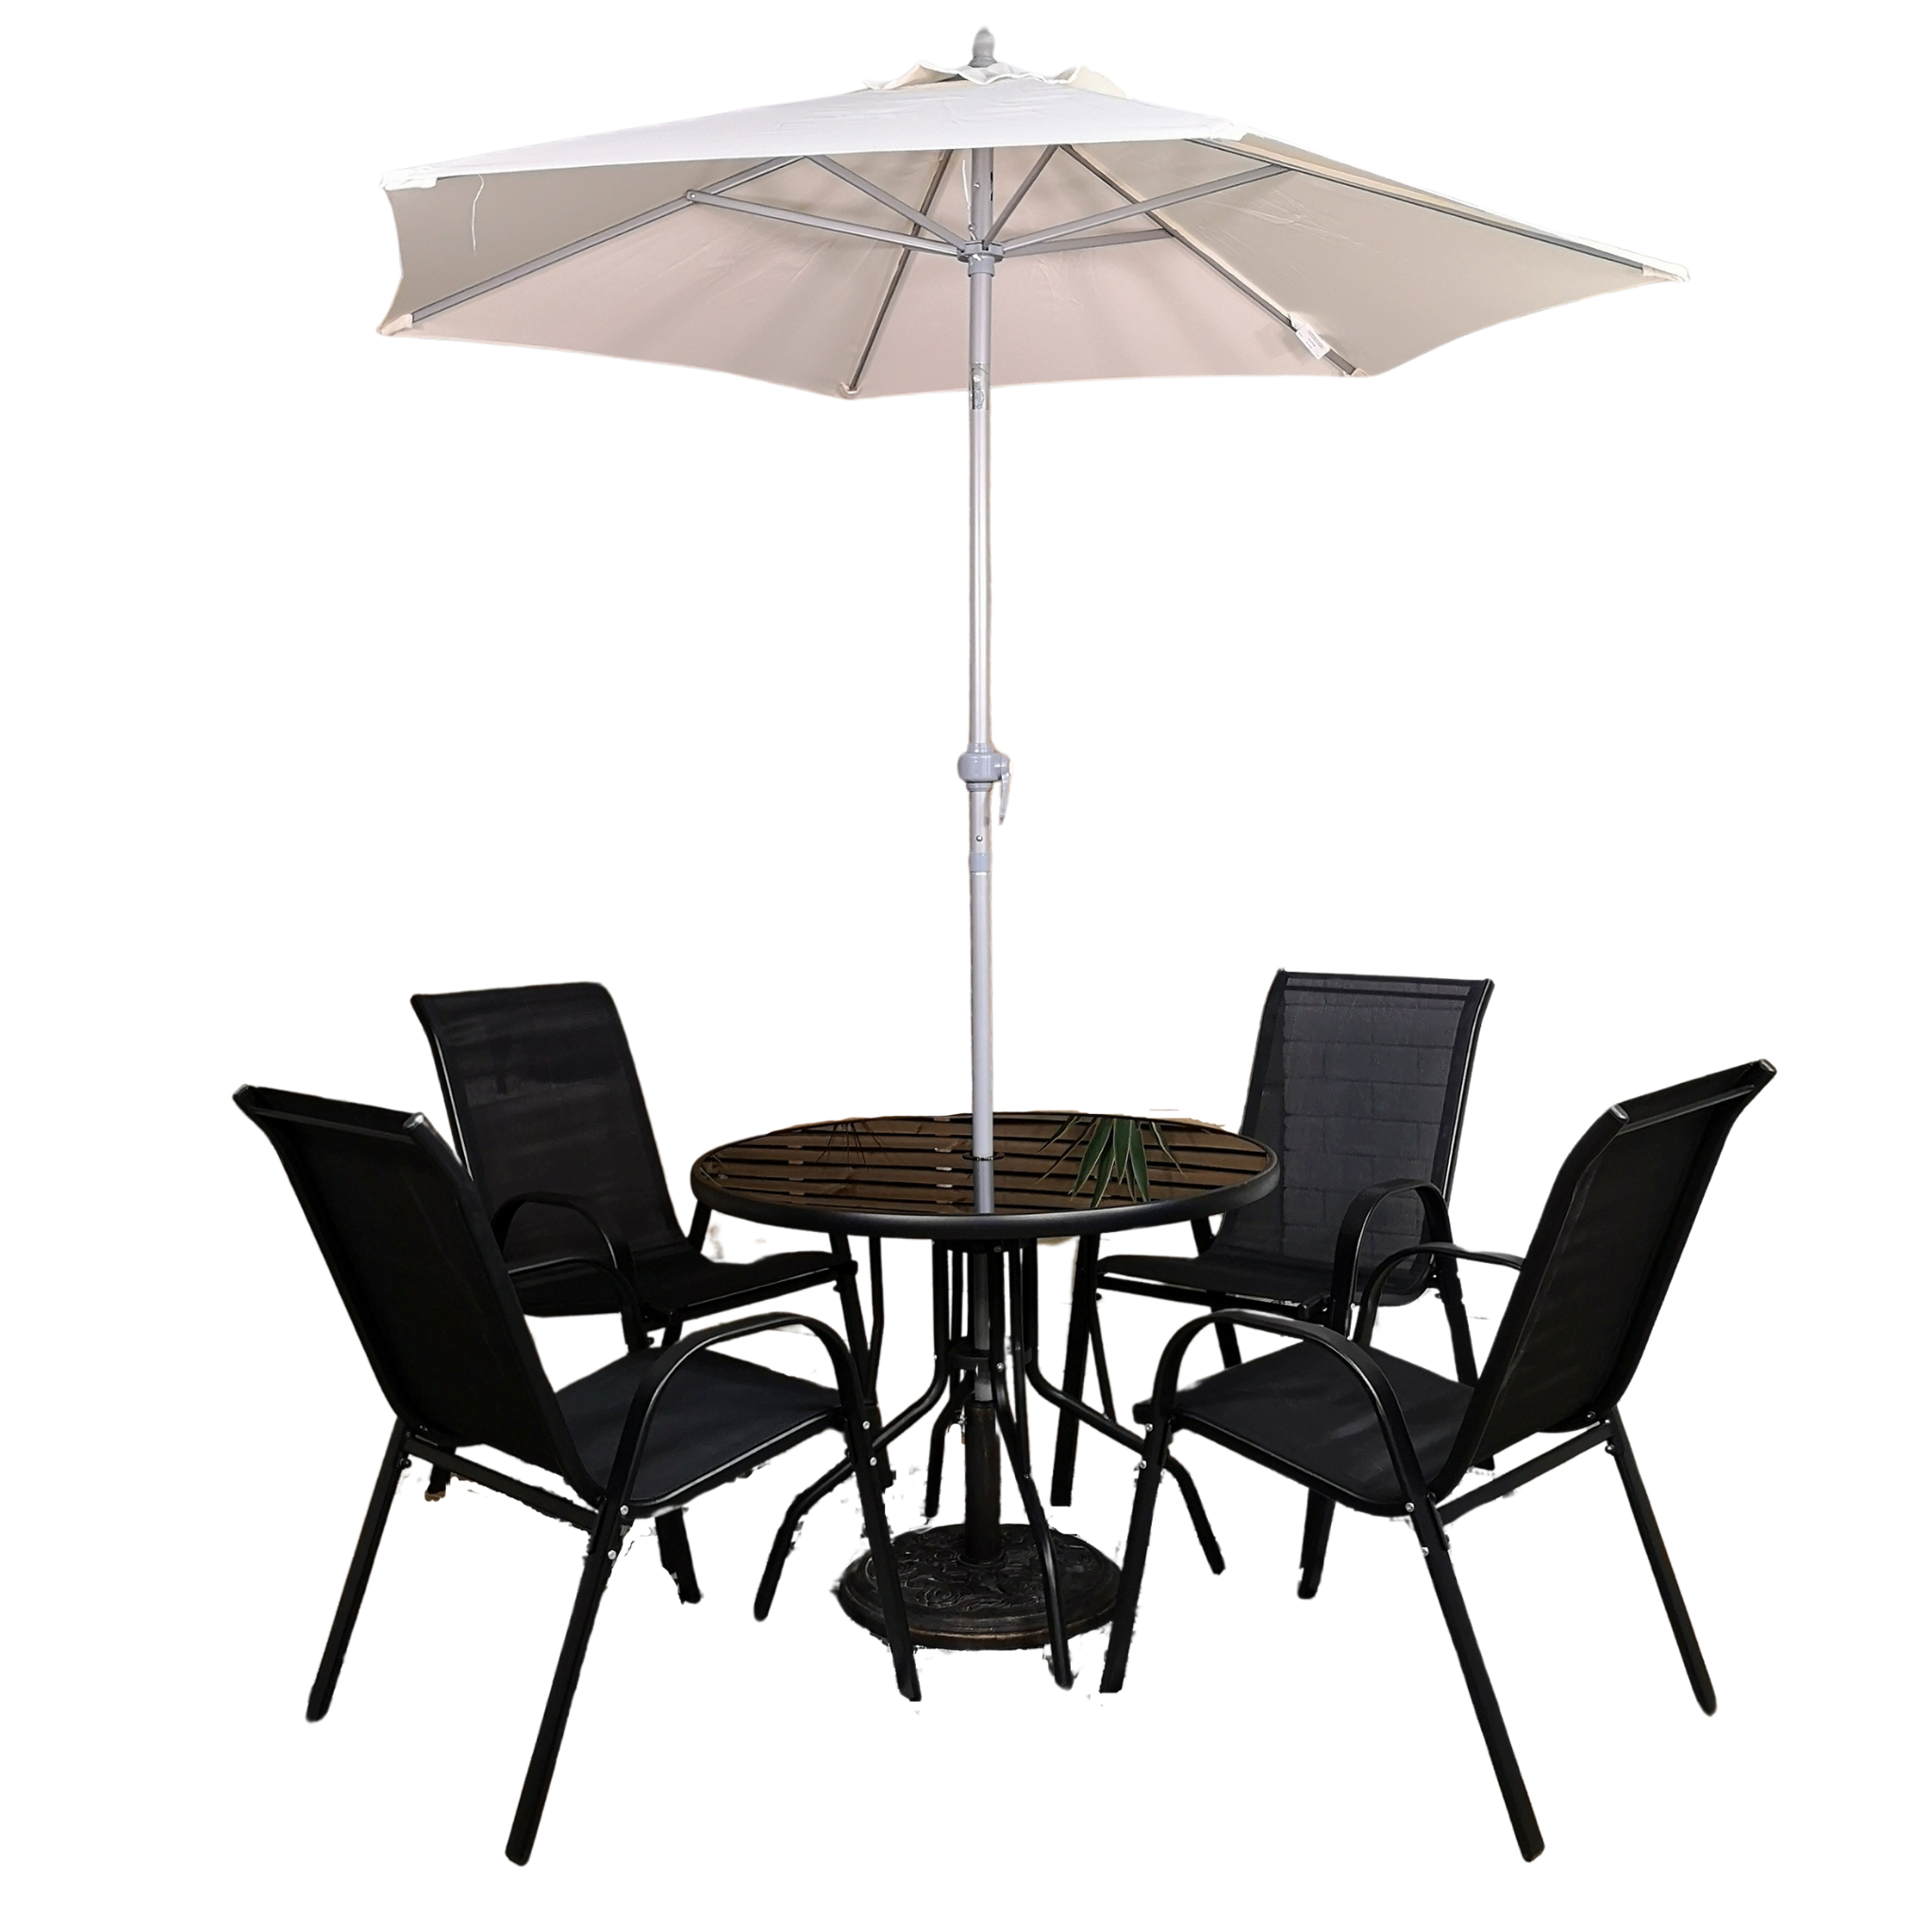 Outdoor 4 Person Round Glass Top Garden Patio Dining Table Chairs With Cream Parasol and Base Set